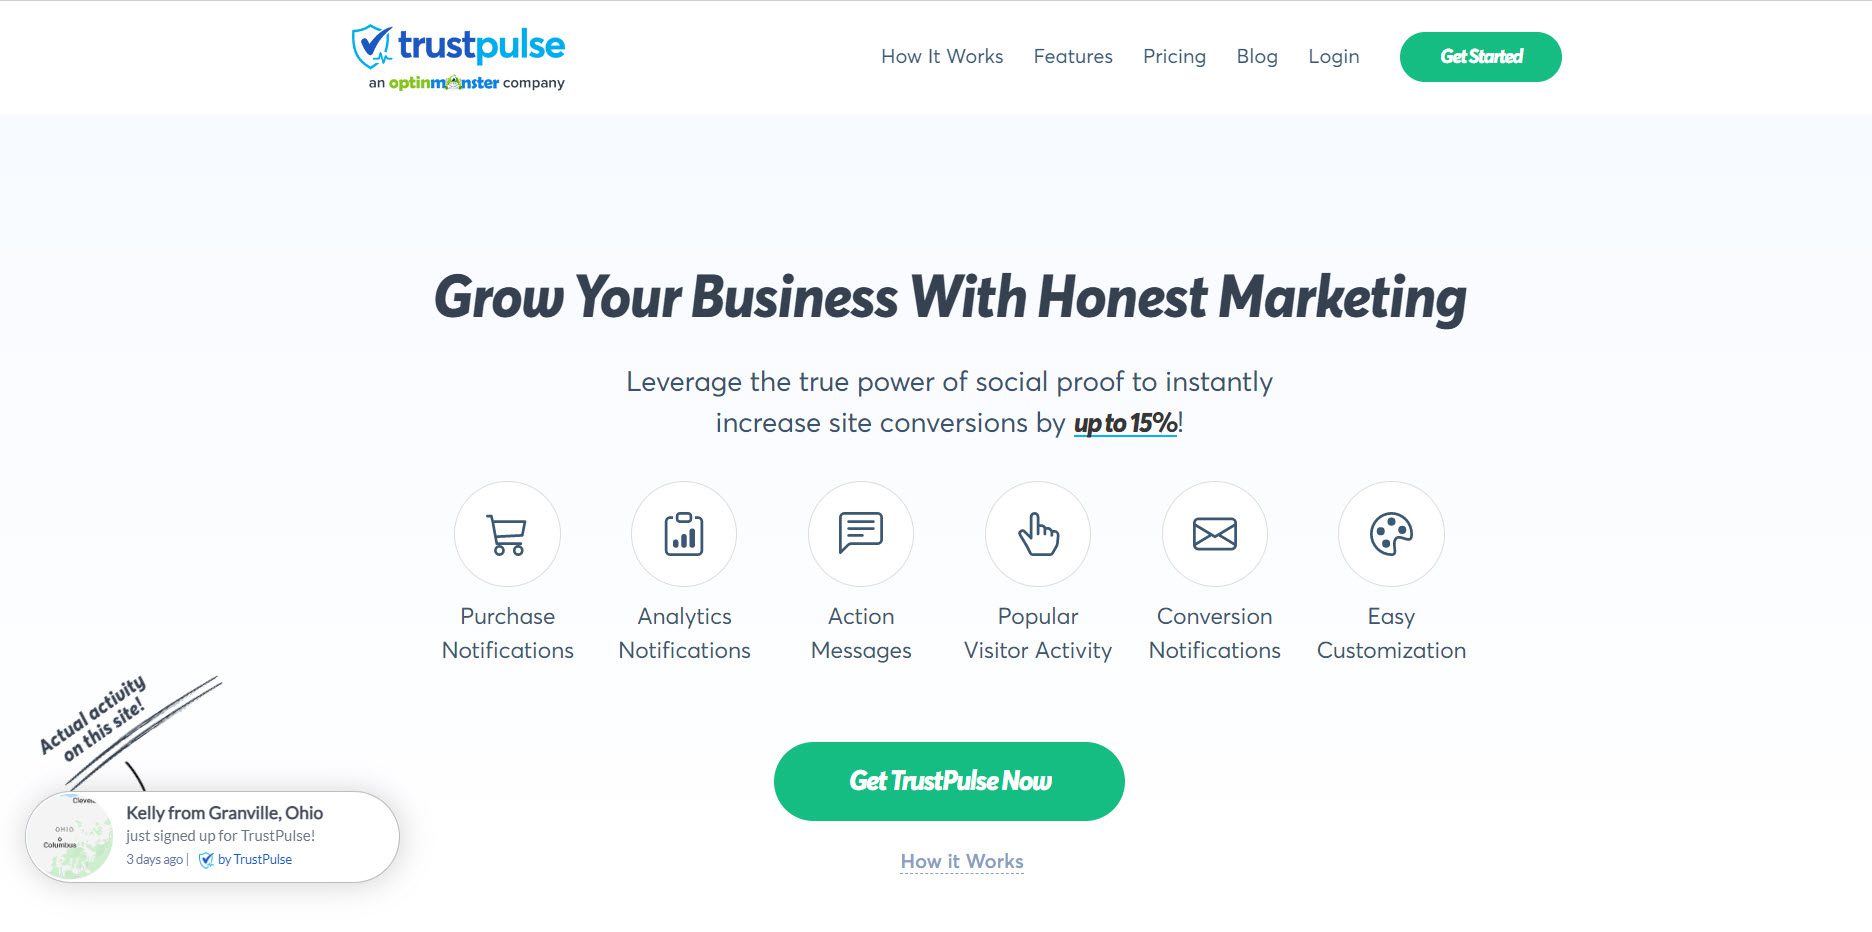 trustpulse for online course marketing strategy